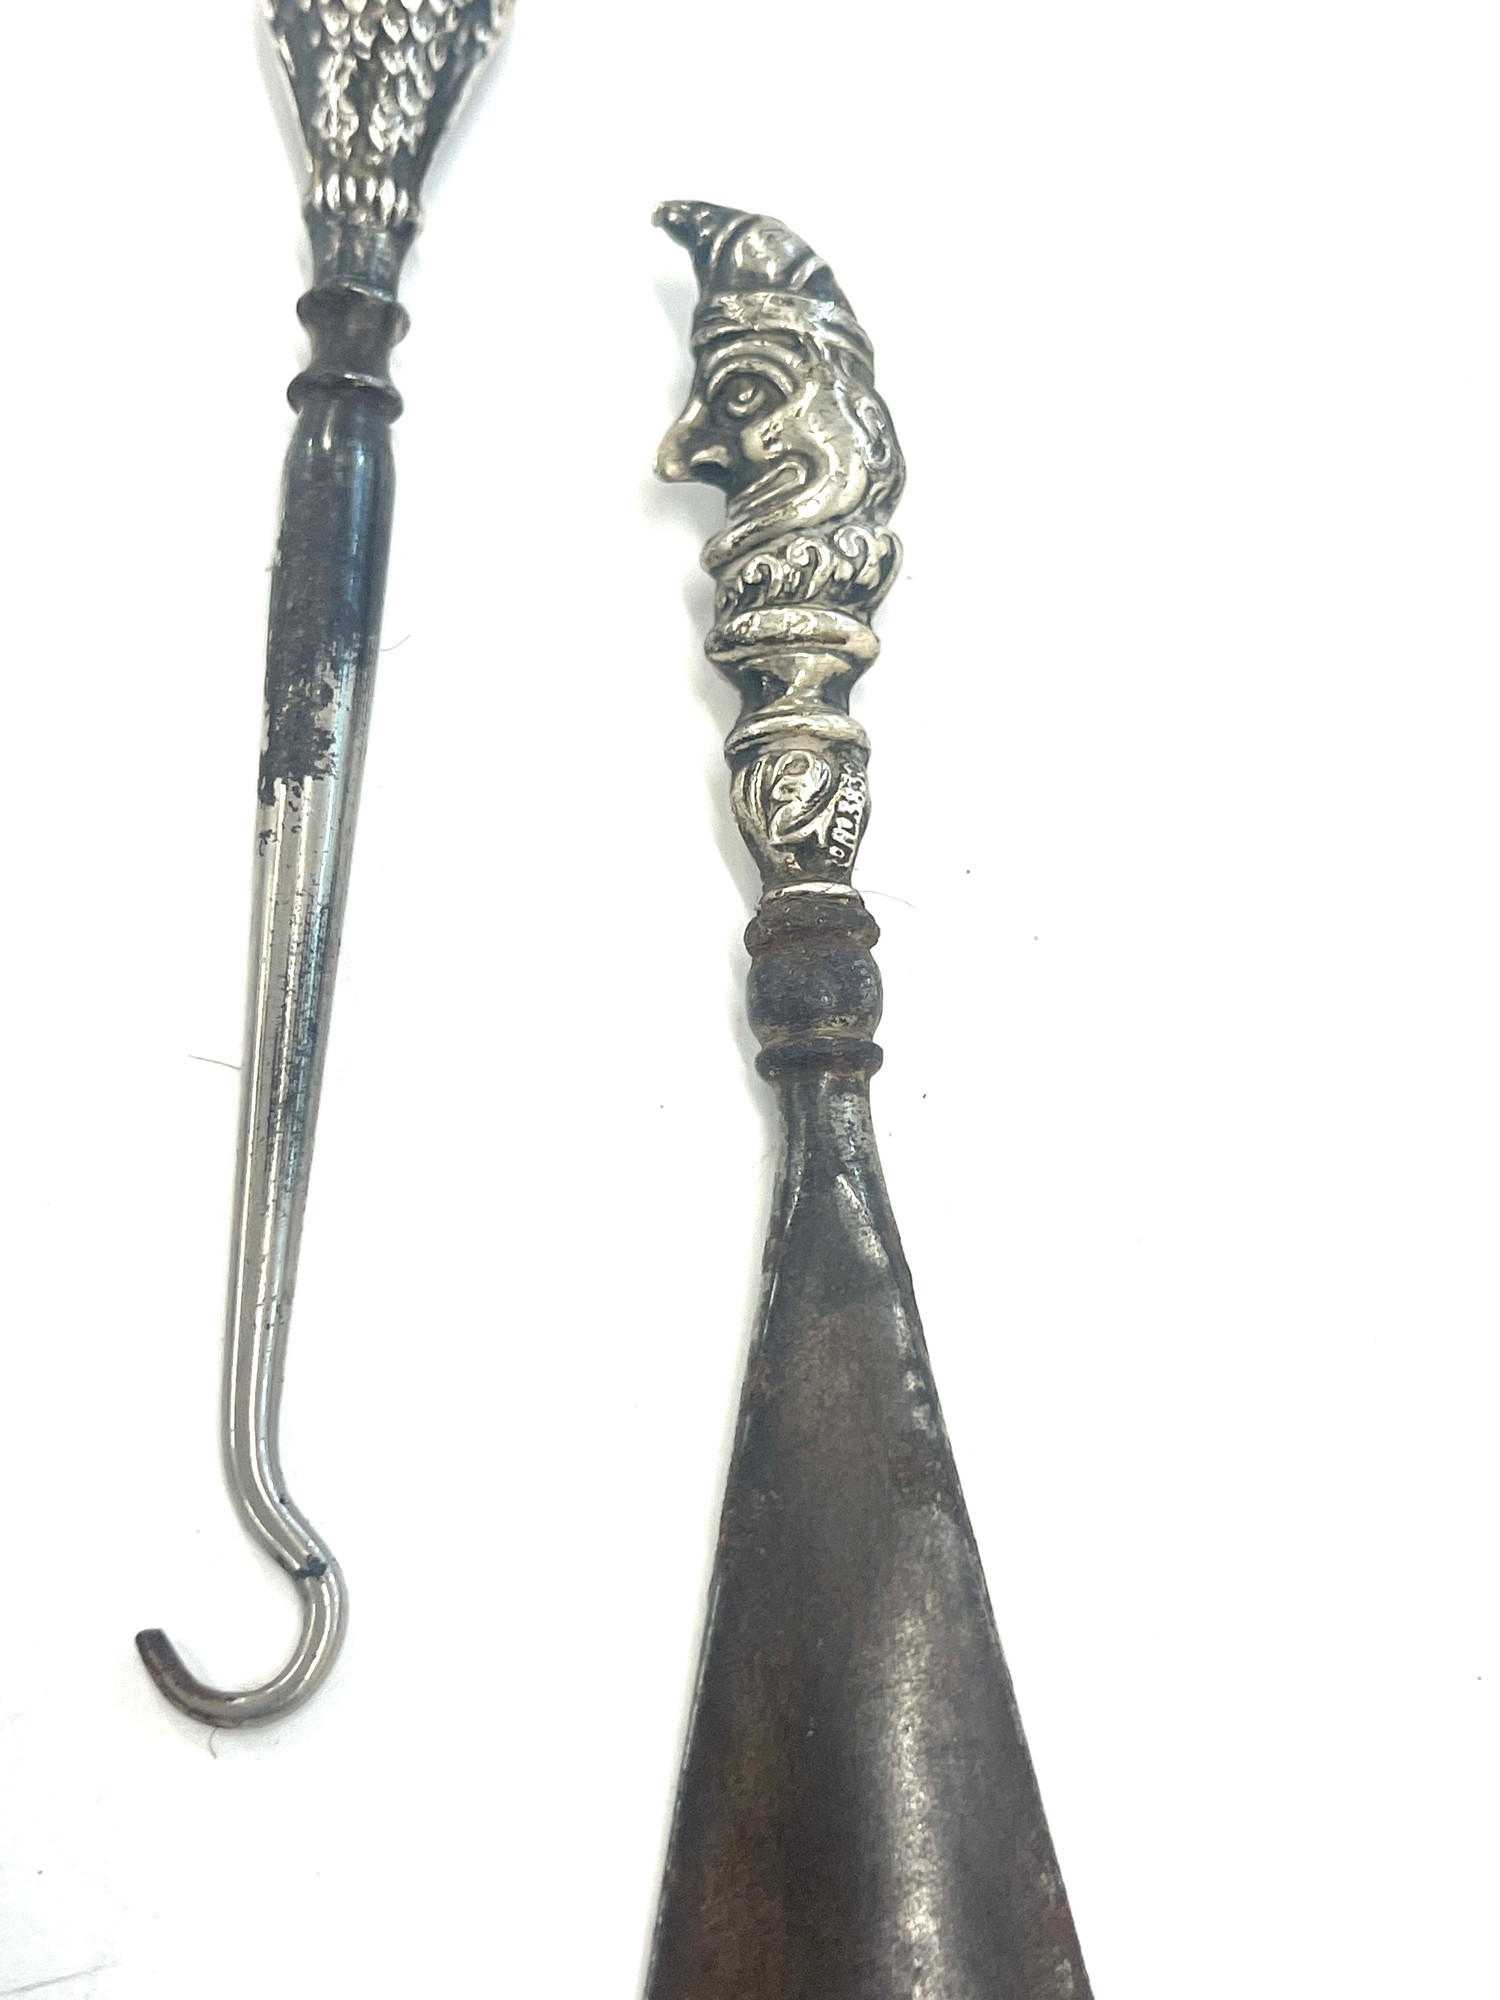 Antique silver handled shoe horns and button hook, owls with red eyes and Mr Punch - Image 2 of 3